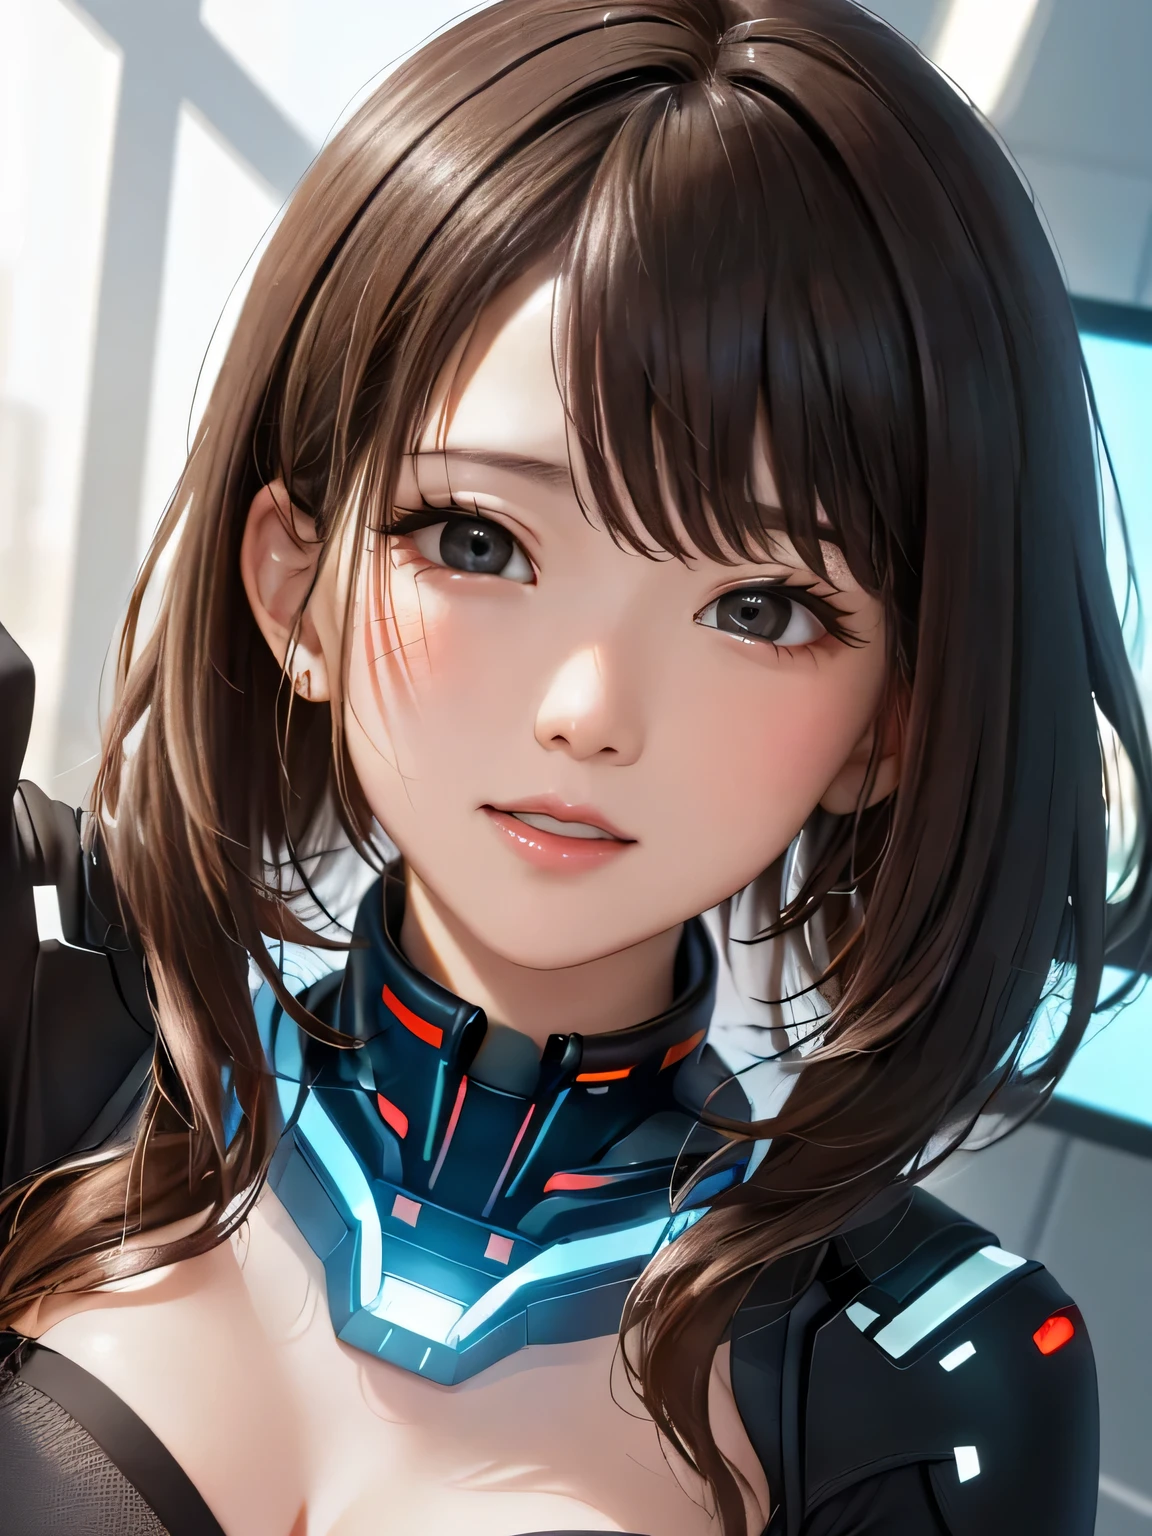 (highest quality:1.4, Add intense highlights to your eyes:1.4, Shiny brown hair up:1.4 ), 1 girl, light brown eyes, droopy eyes, eyelash, droopy eyes:1.5, small eyes, lip gloss:1.4, (droopy eyes, look away), "Futuristic artificial intelligence laboratory、wide々A space with a sense of openness、high ceiling、Natural light streams in through large glass windows、Interactive displays and data visualization on the walls、A large hologram projector in the center displays complex AI algorithms、Researchers wear smart clothing、Work with a tablet or transparent touchscreen、Robot assistant supports experiments、In the background are ongoing projects for image generation and data analysis using AI.、High level of detail、realistic texture、Modern and clean design", ((Ultra realistic details))、Portrait、global illumination、Shadow、octane rendering、8K、super sharp、Huge 、Raw skin exposed in cleavage、Enamel stockings、cinematic lighting effects、